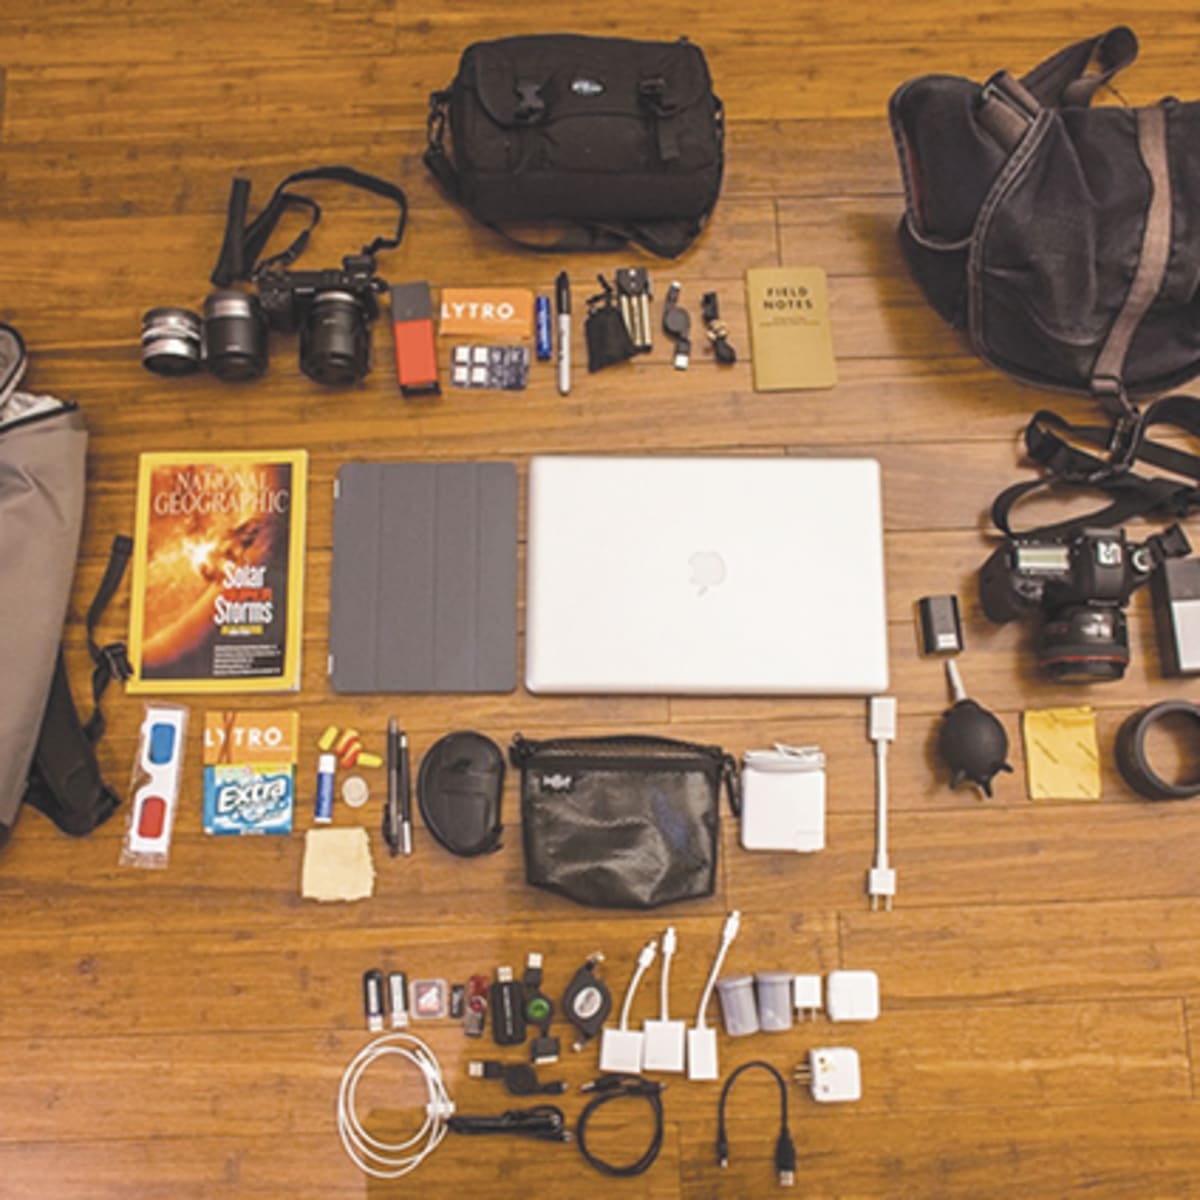 What's in Your Bag? - WSJ